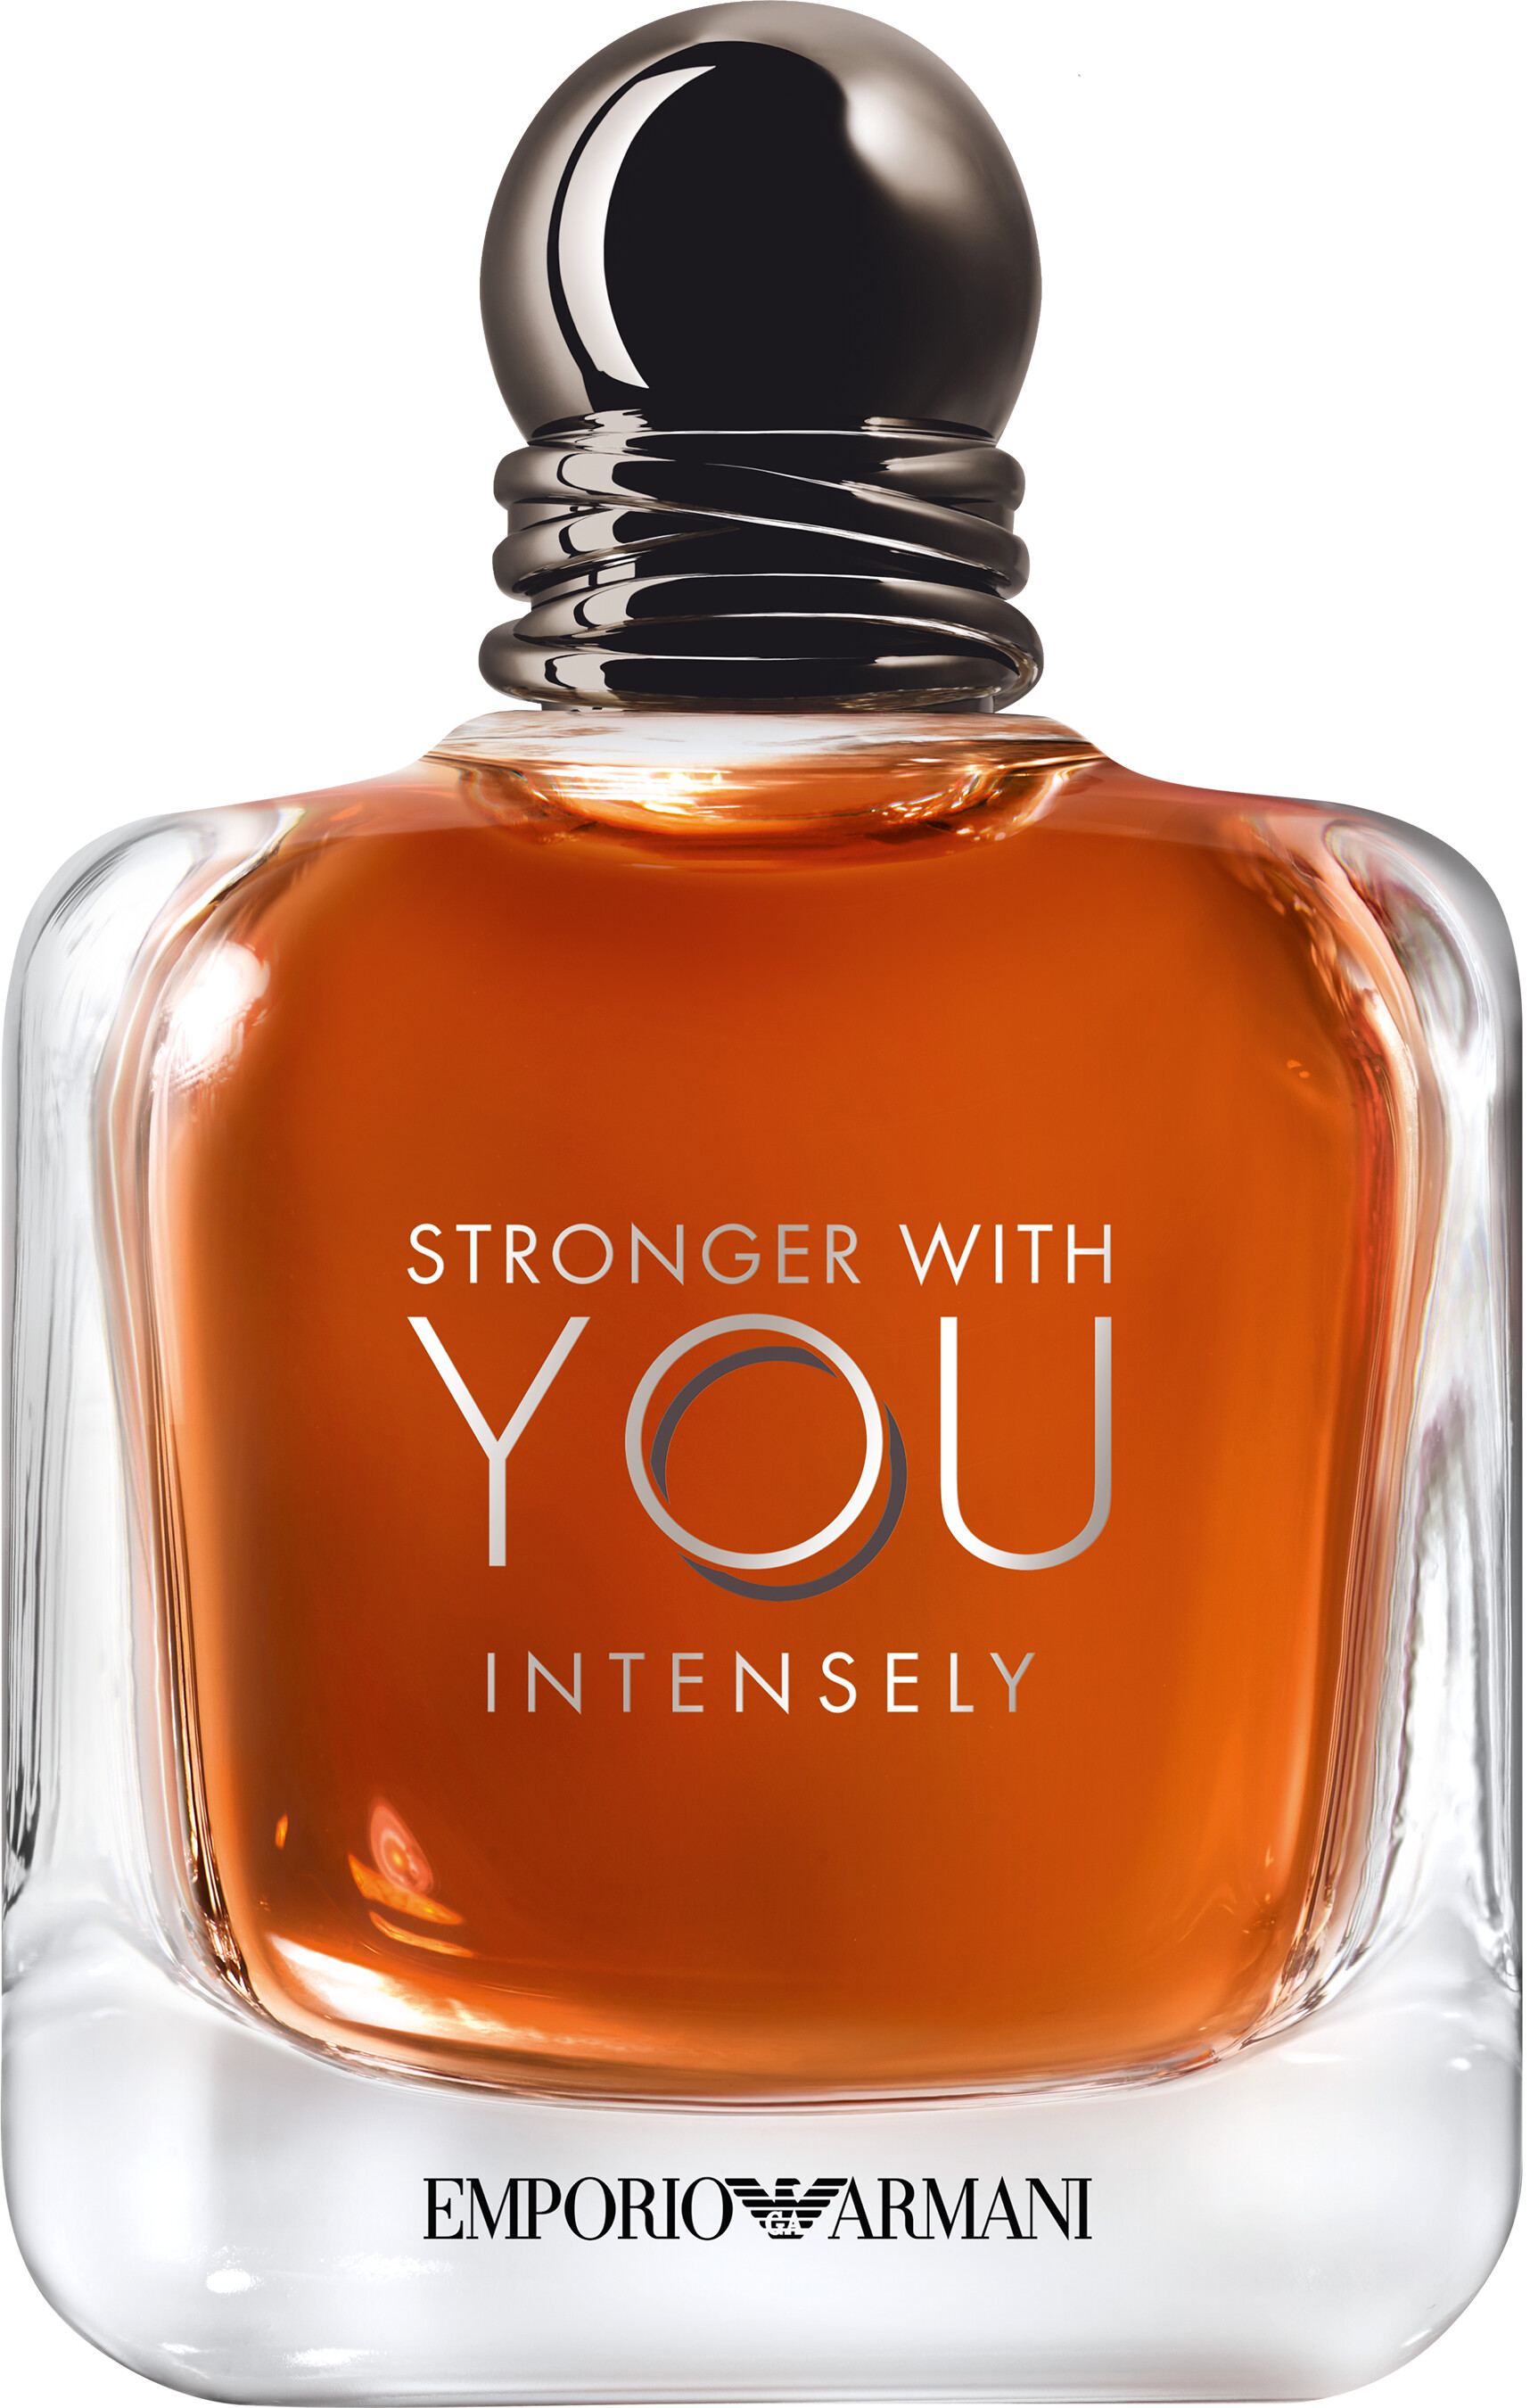 stronger with you intensely review